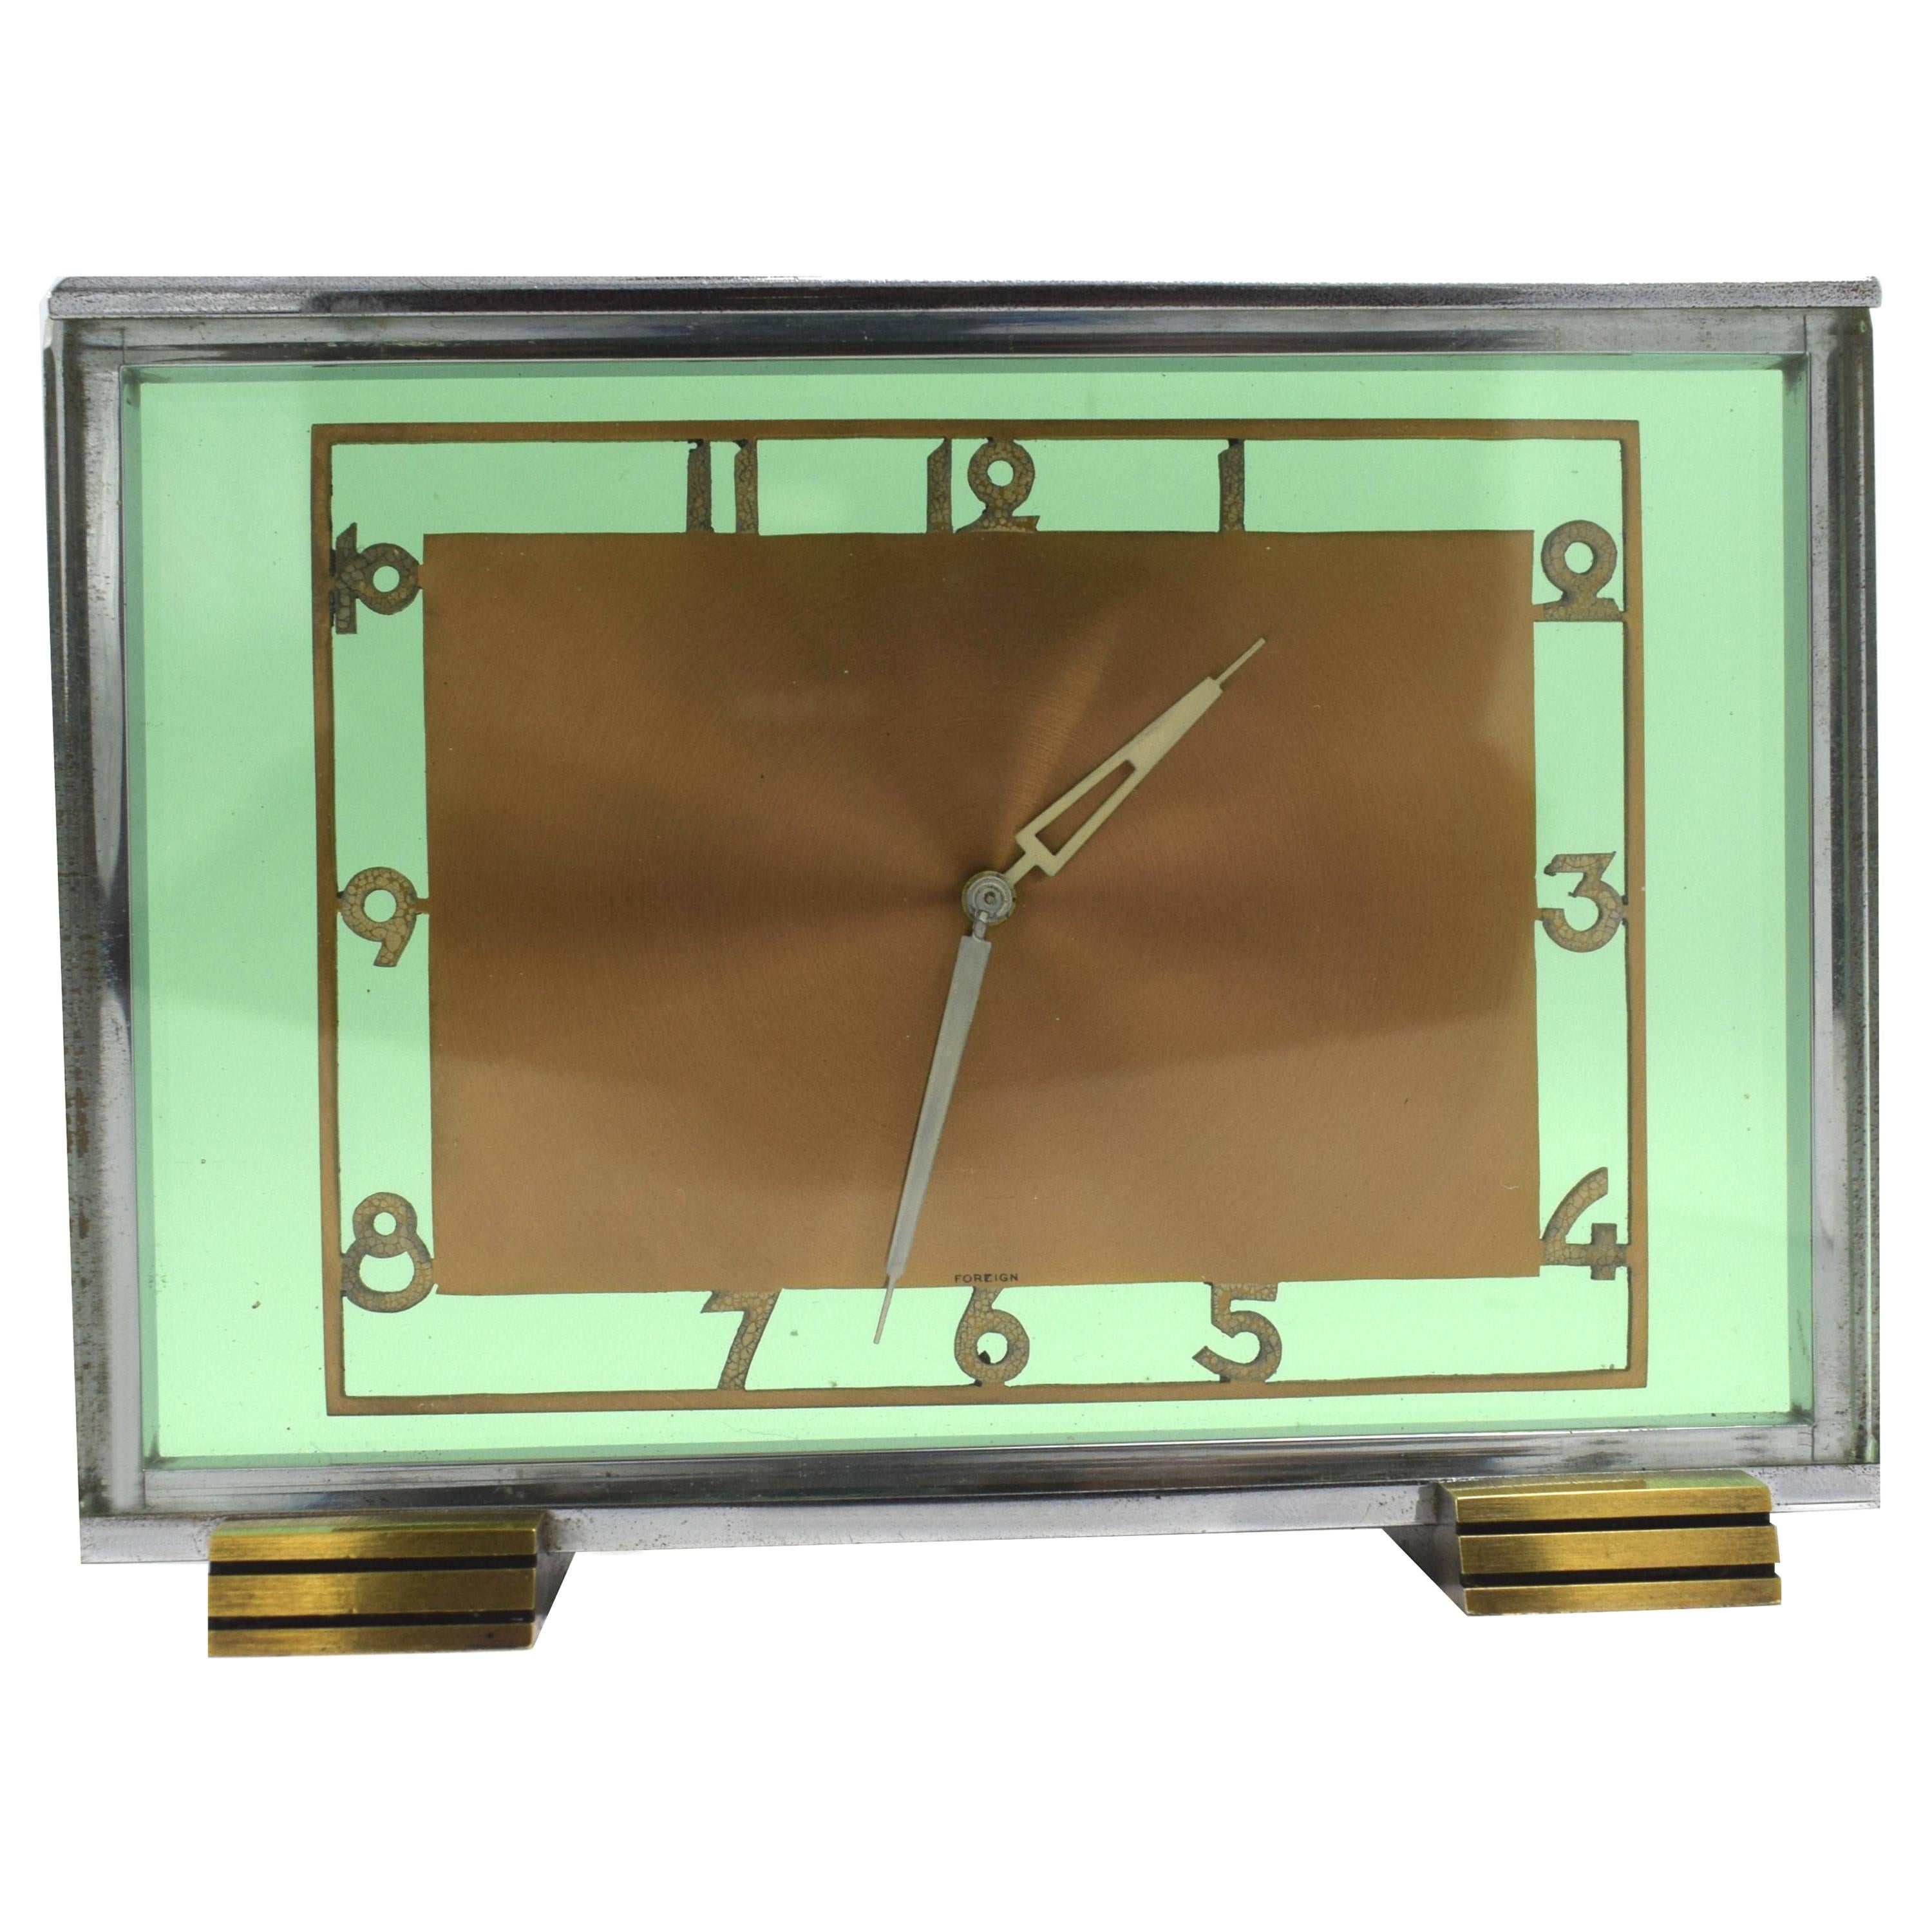 Very stylish 1930s Art Deco modernist pale green glass clock within a chrome frame. On picking this clock up one can't ignore the weight which feels unusually heavy, the quality is undeniable. The two thick panes of green glass sit either side a